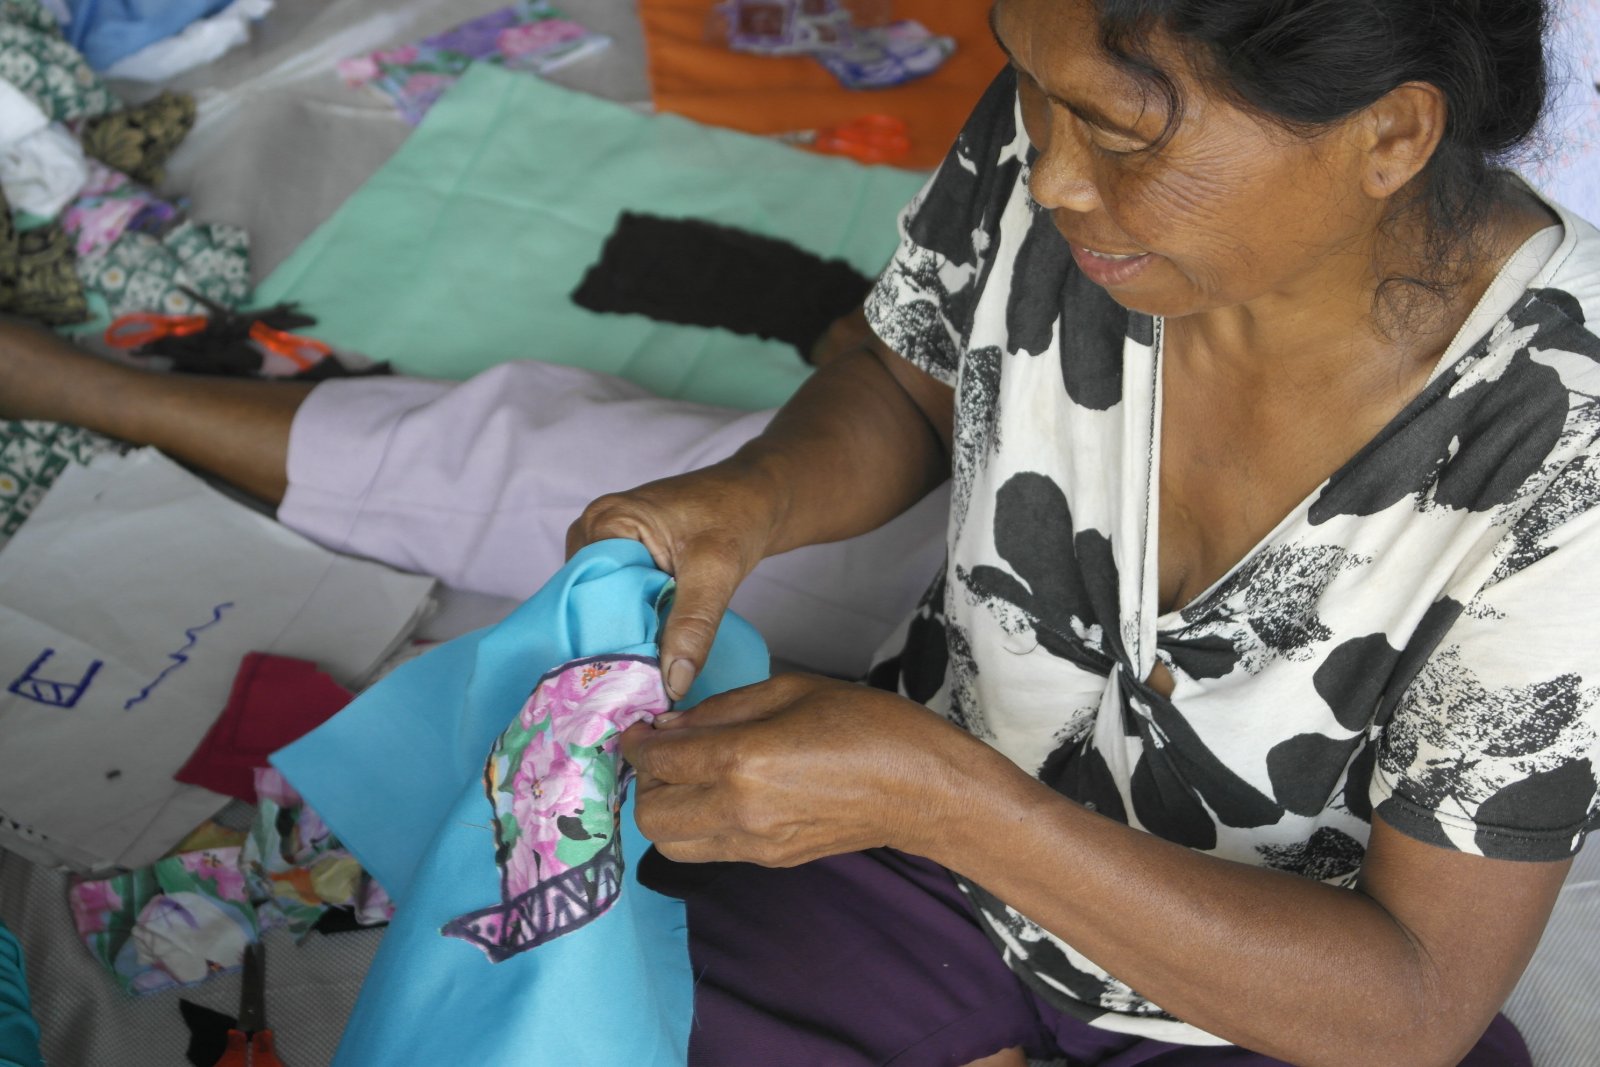 A participant threads running stitches over the dwelling she dreams of coming home to upon resettlement. Photo by libudsuroy